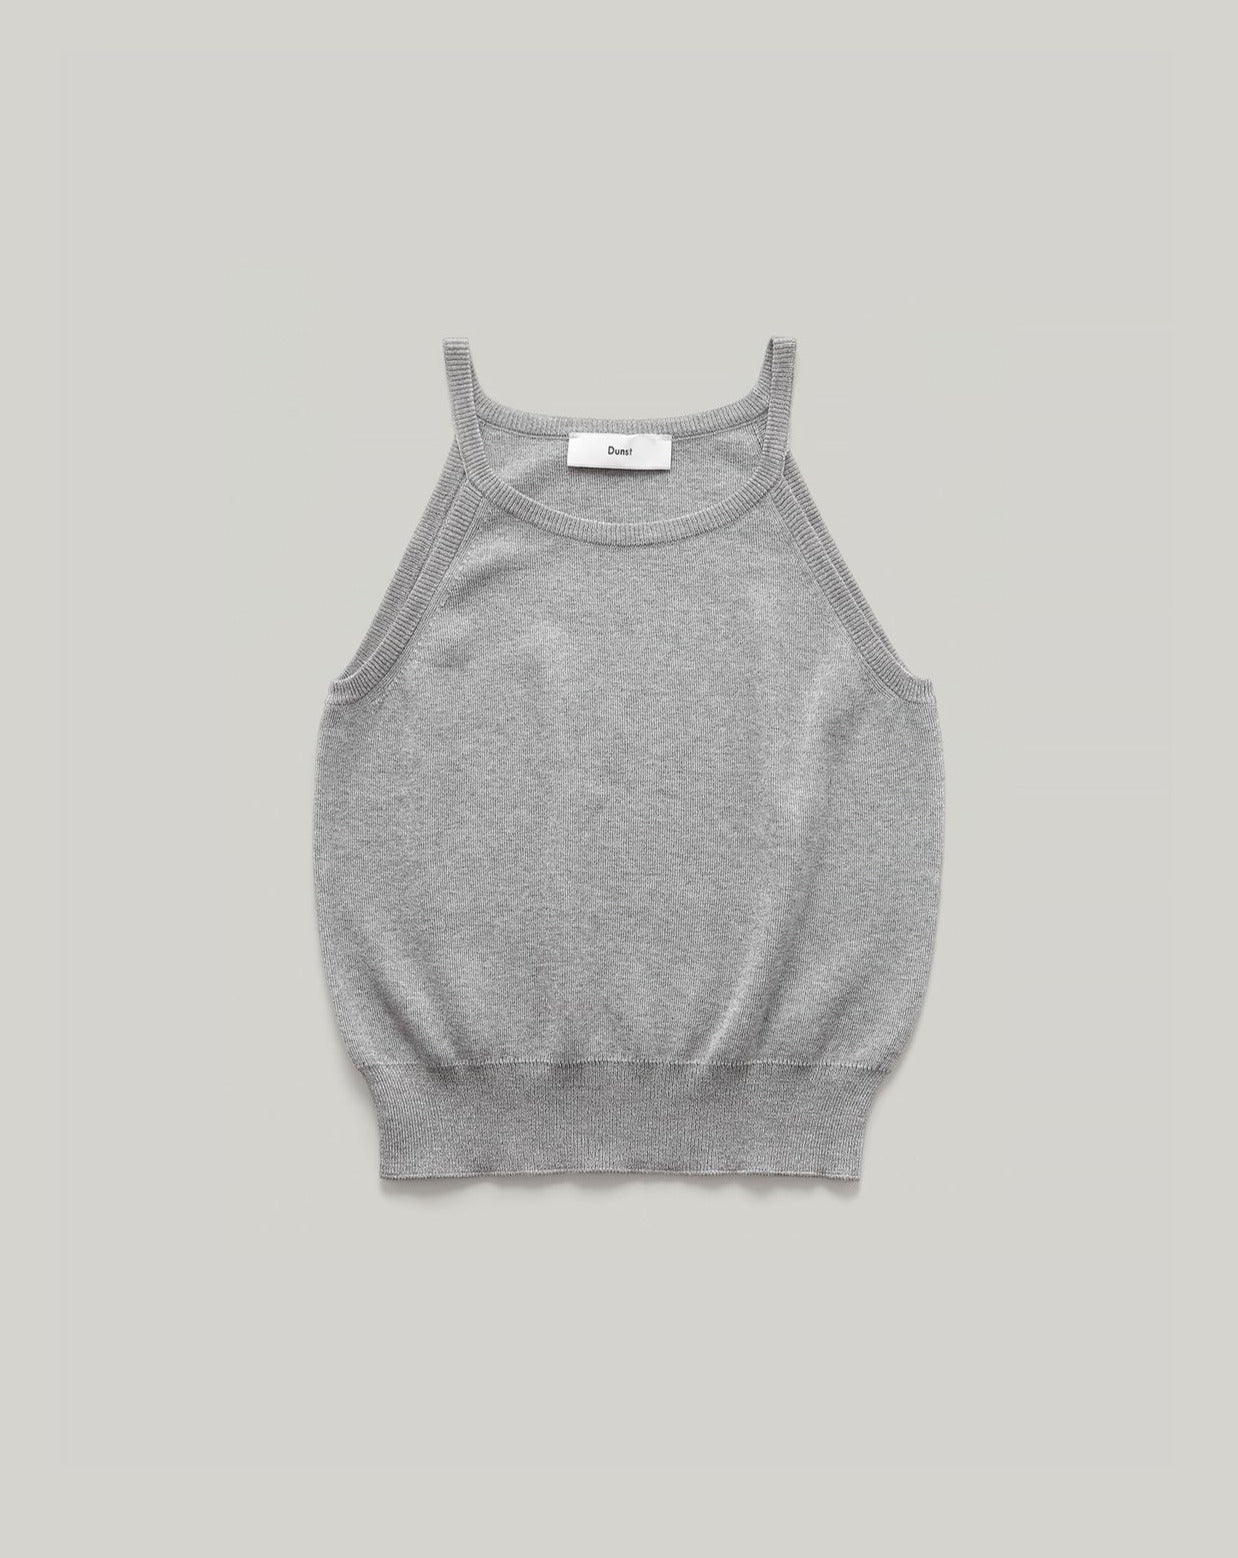 Knitted T-shirt by Dunst